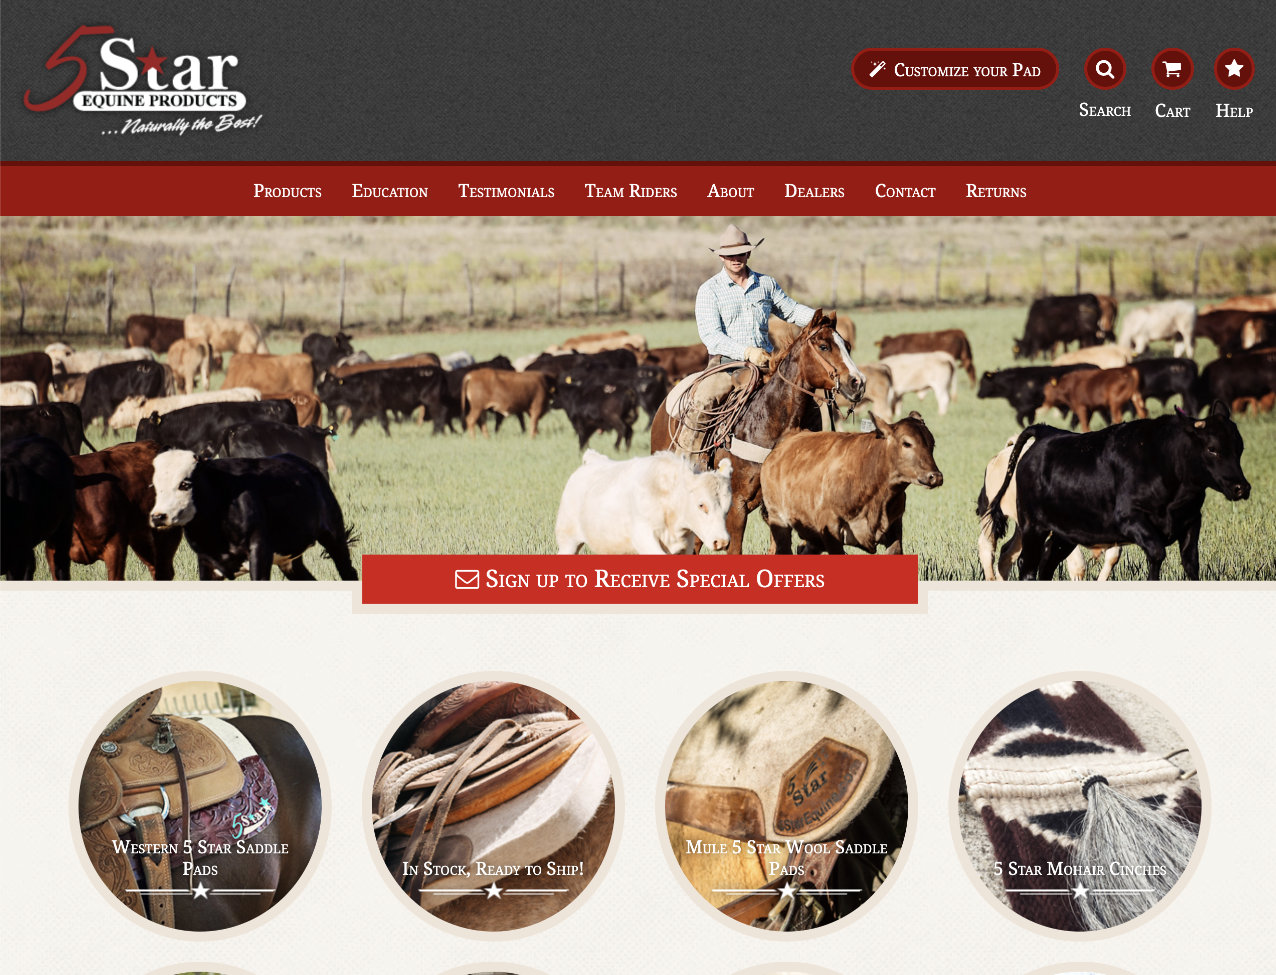 5 Star Equine Products homepage